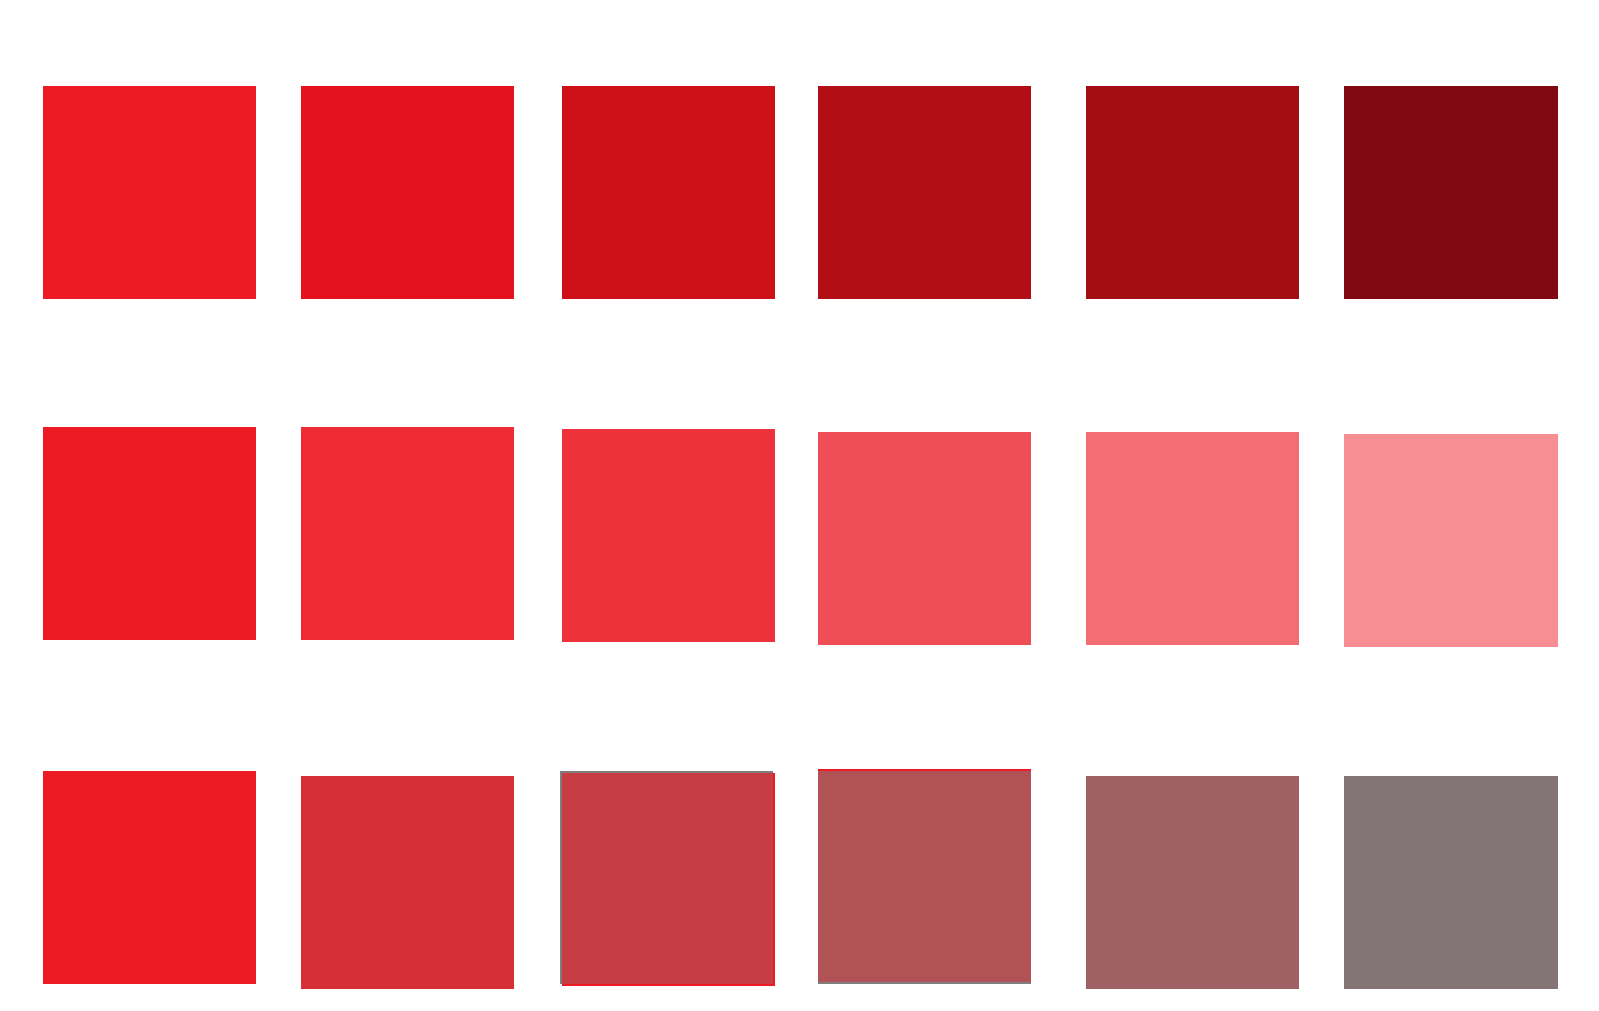 examples of shade, tint, and tone